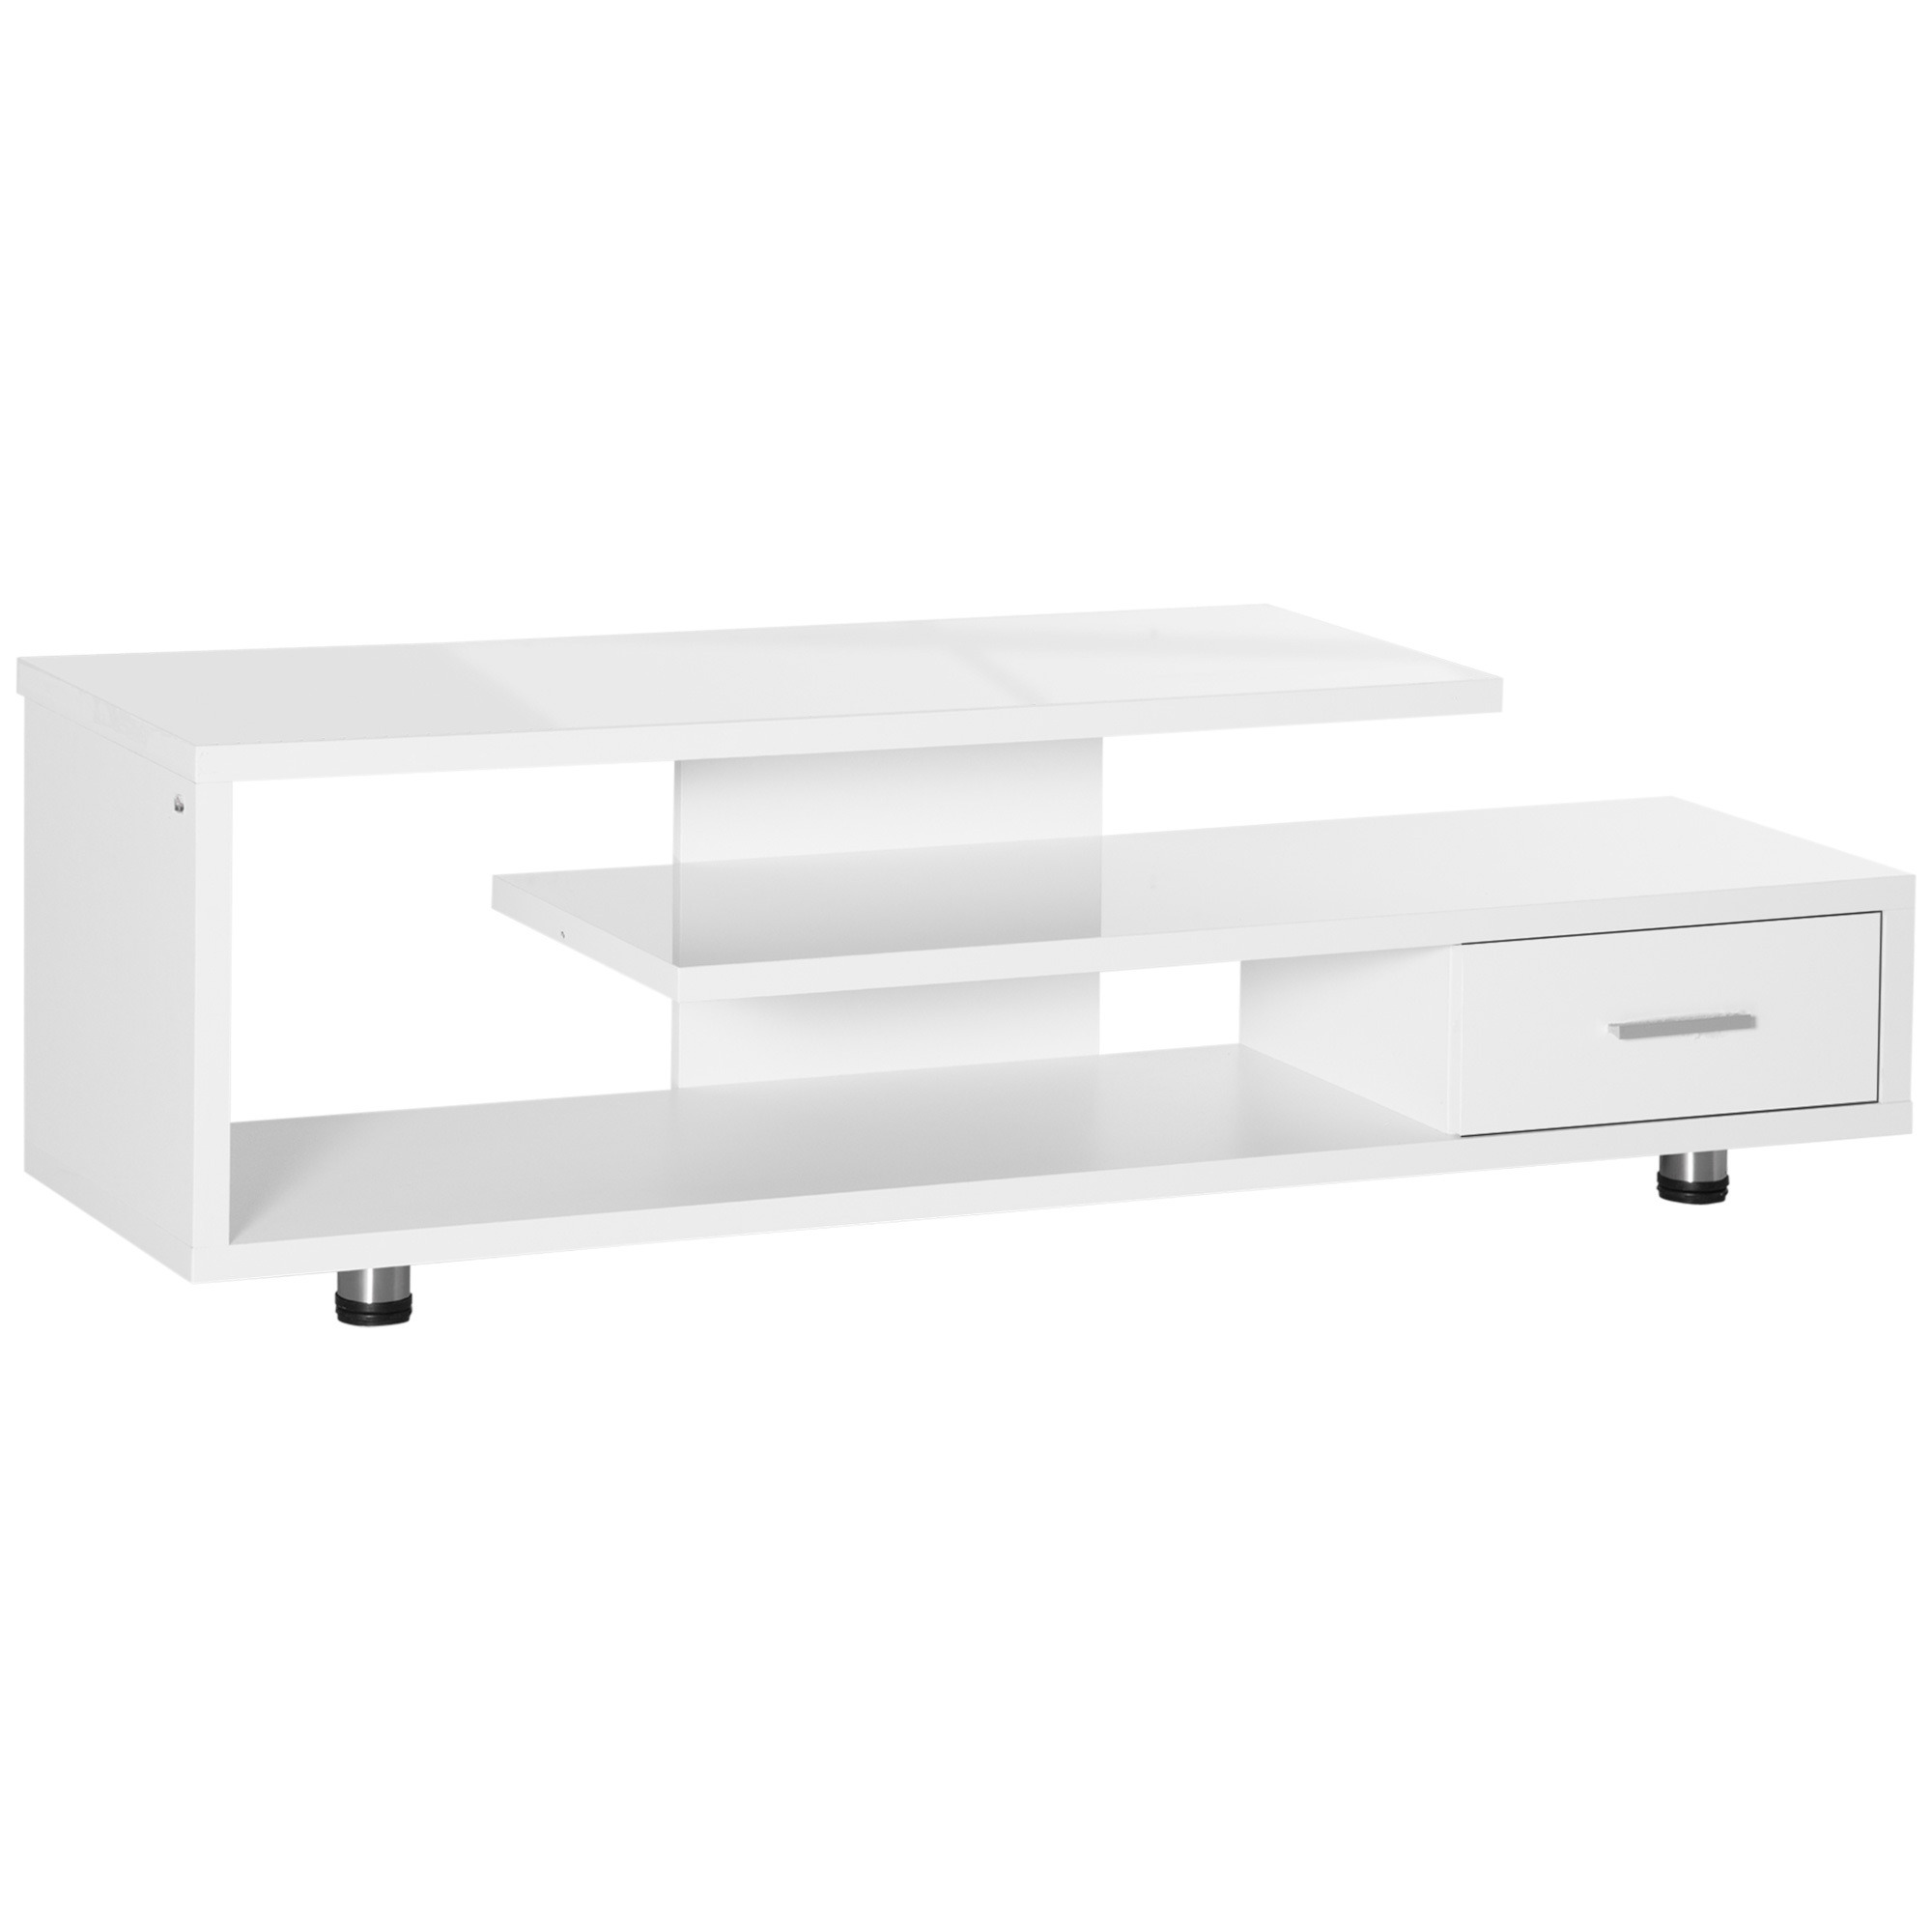 "HOMCOM High Gloss TV Unit for TVs up to 45"", Modern TV Cabinet with Storage Shelf and Drawer, Entertainment Unit for Living Room Bedroom, White"